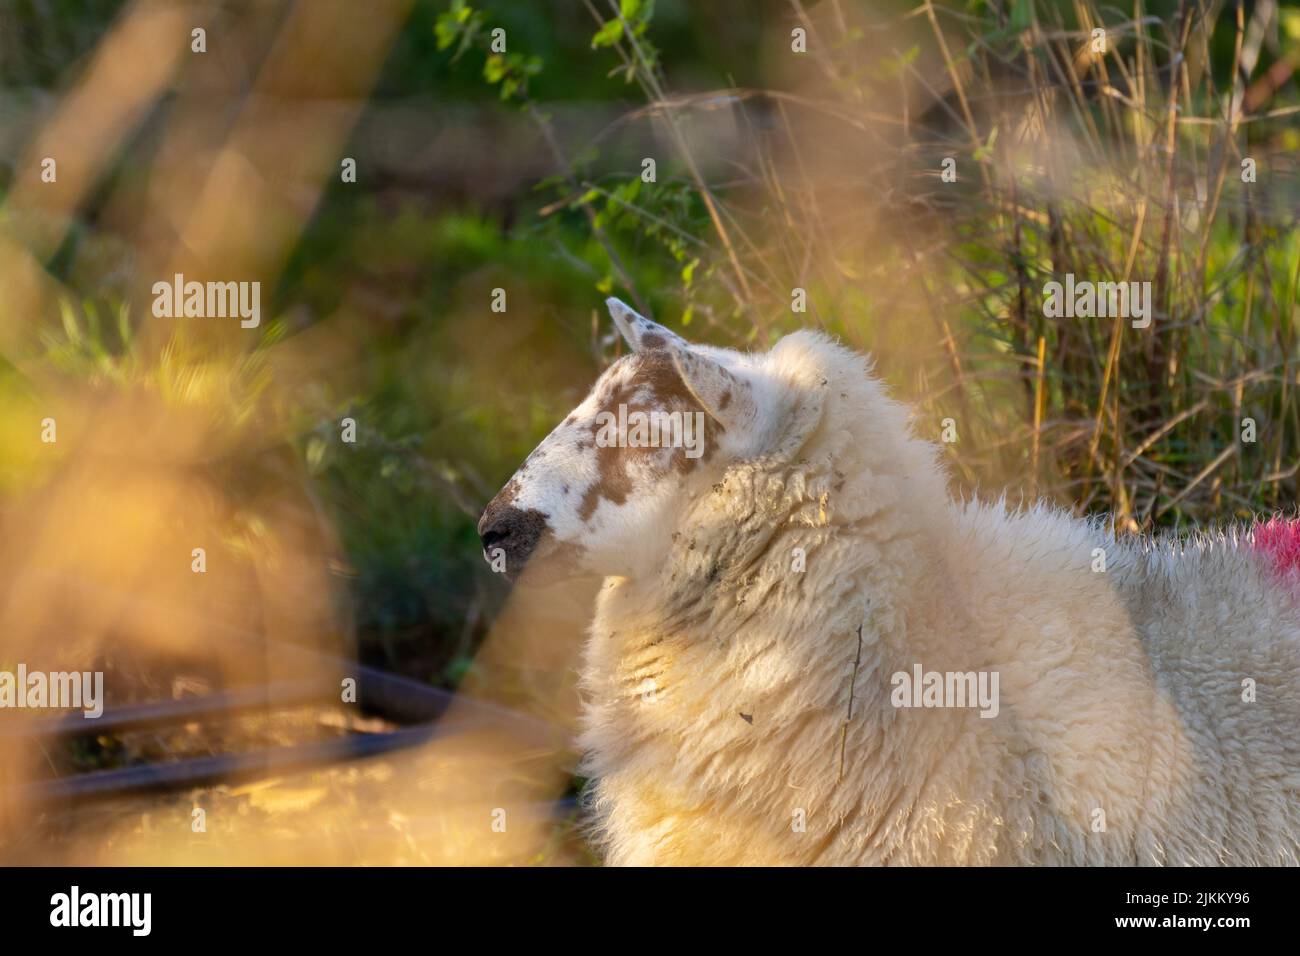 A white Texel sheep behind a fence in a field Stock Photo